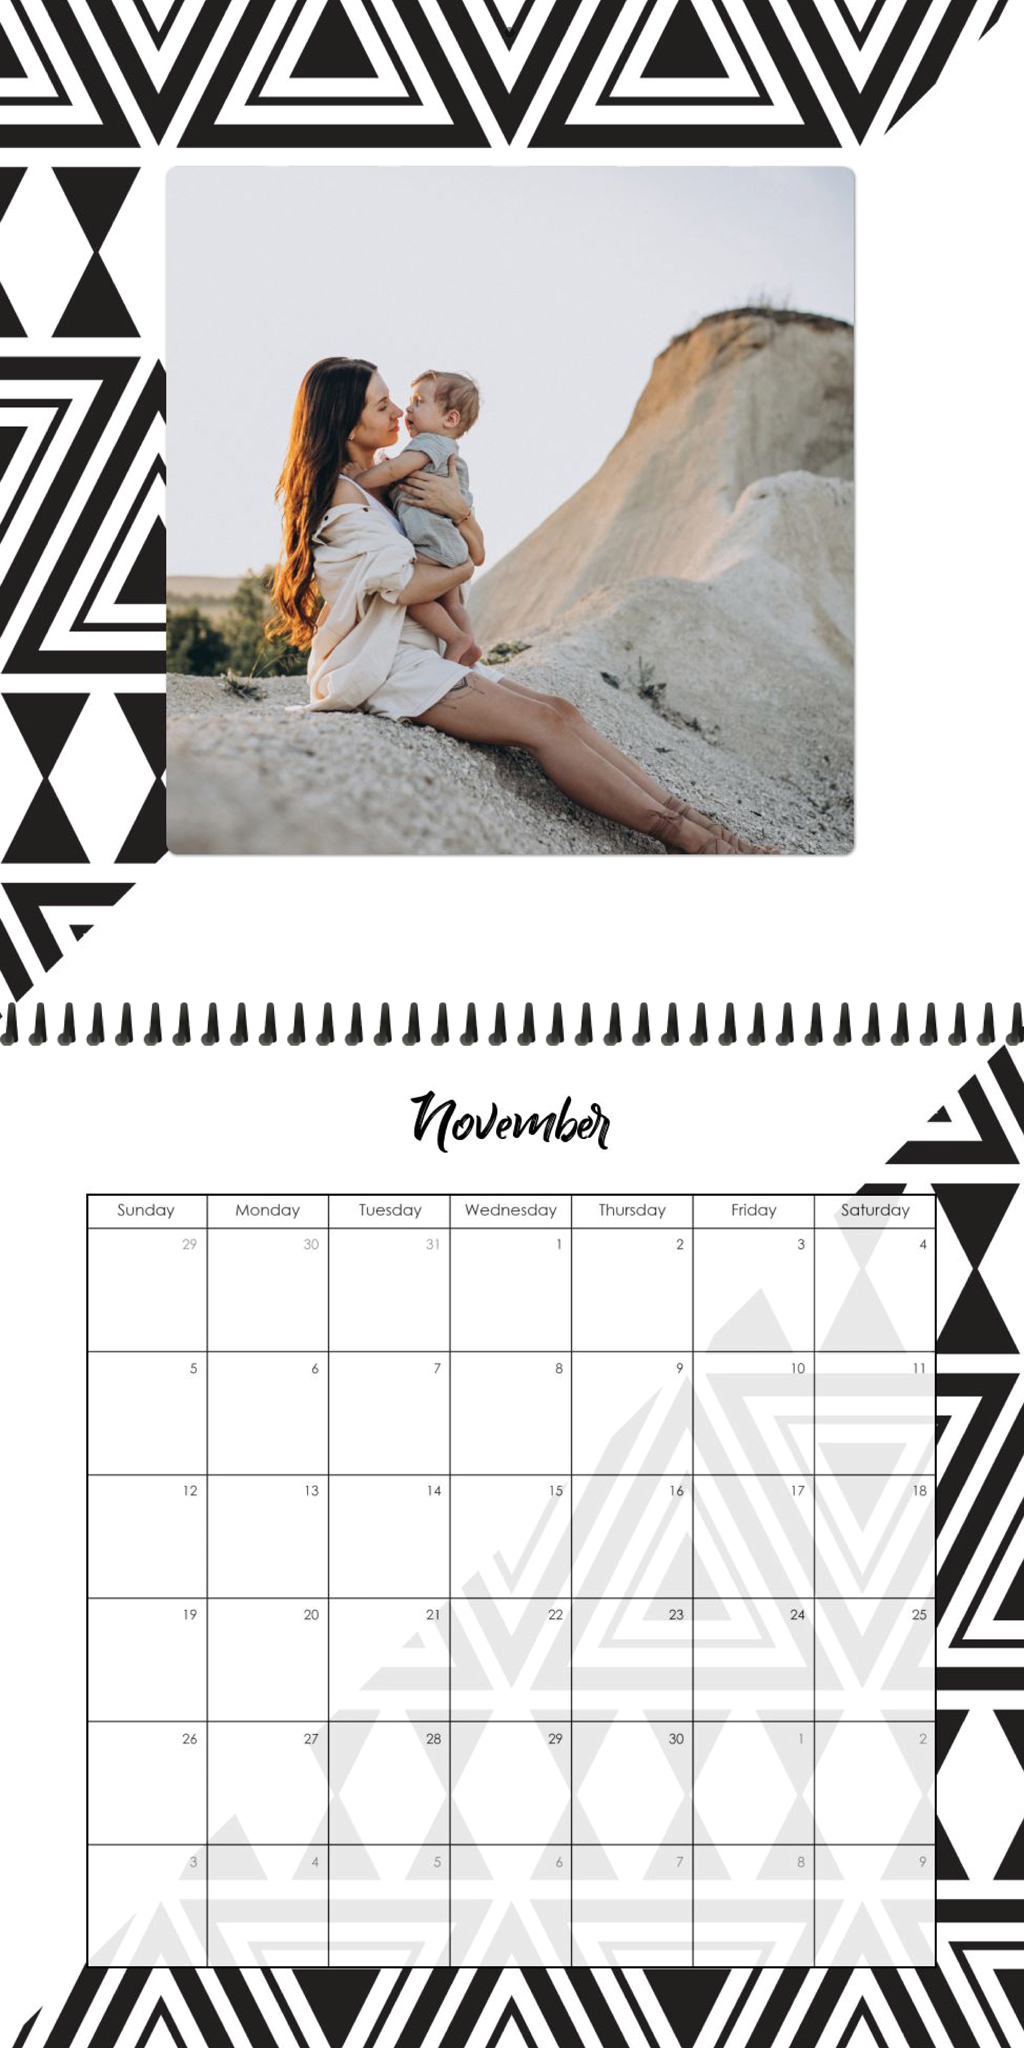 Wall Calendar Patterned Triangle 12x12 11